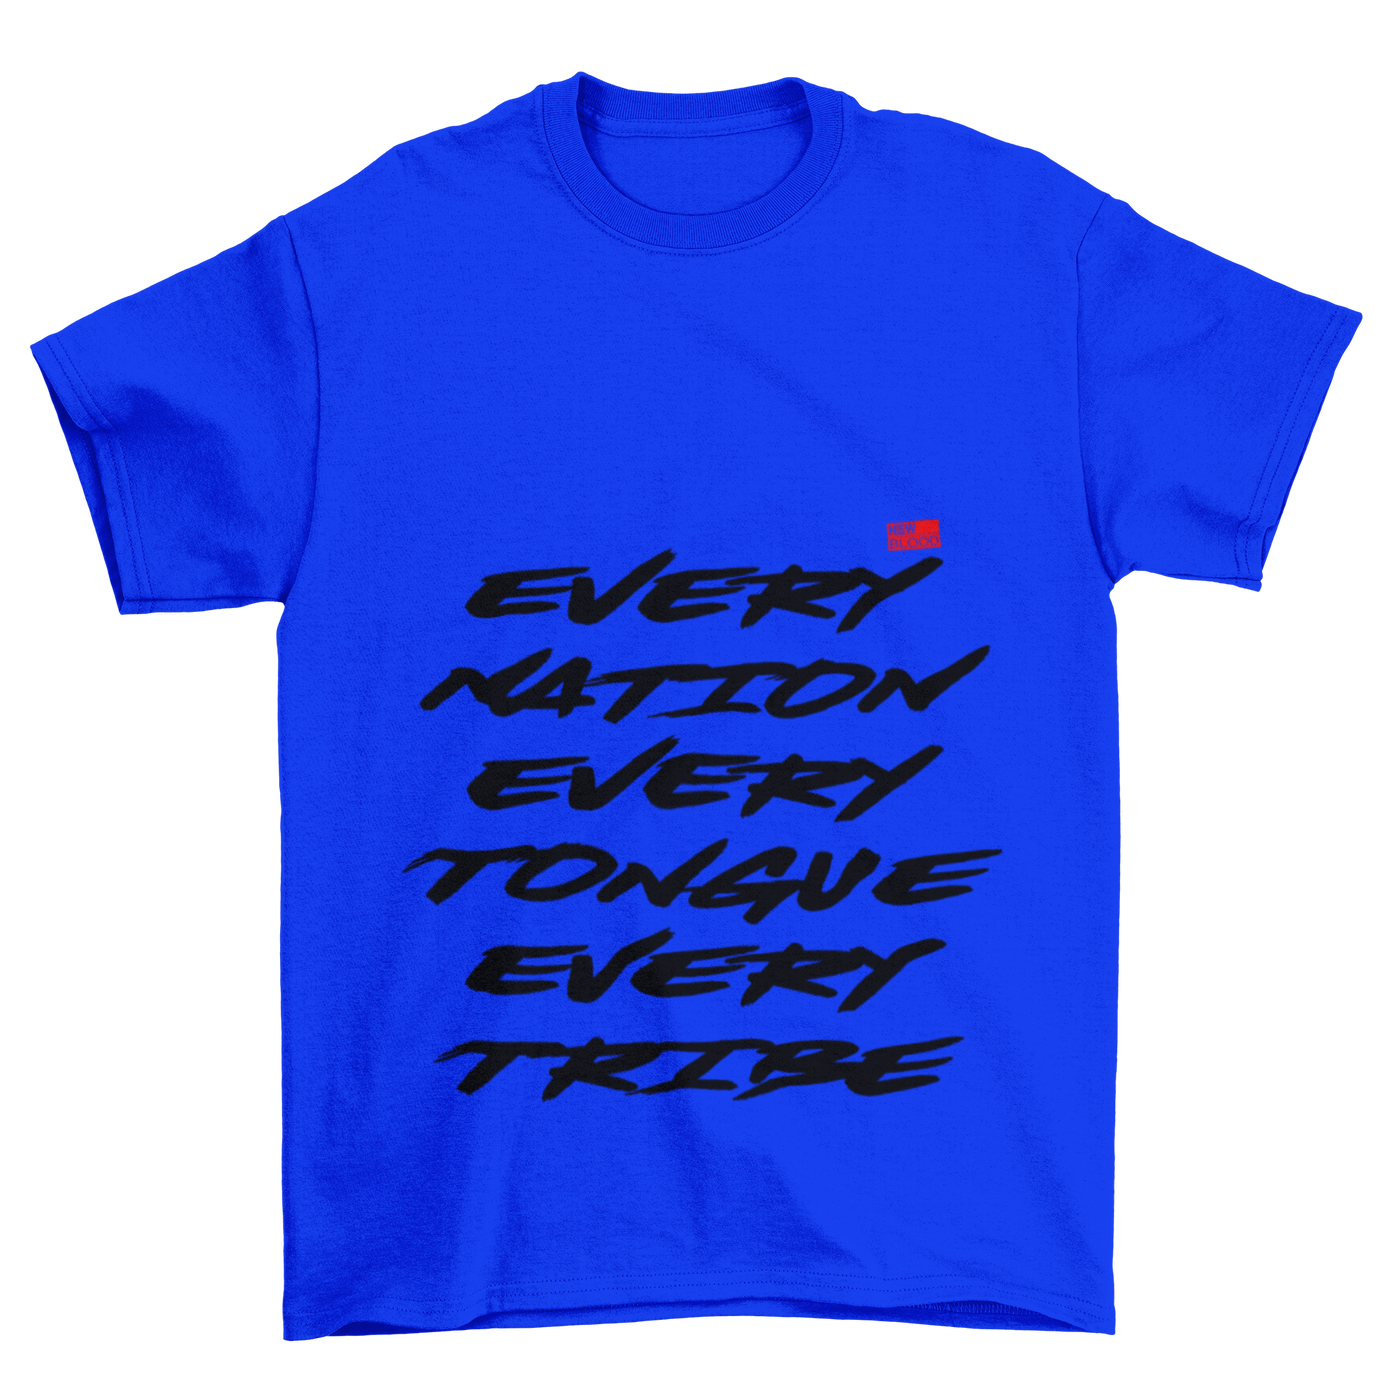 EVERY NATION TONGUE & TRIBE - T-Shirt